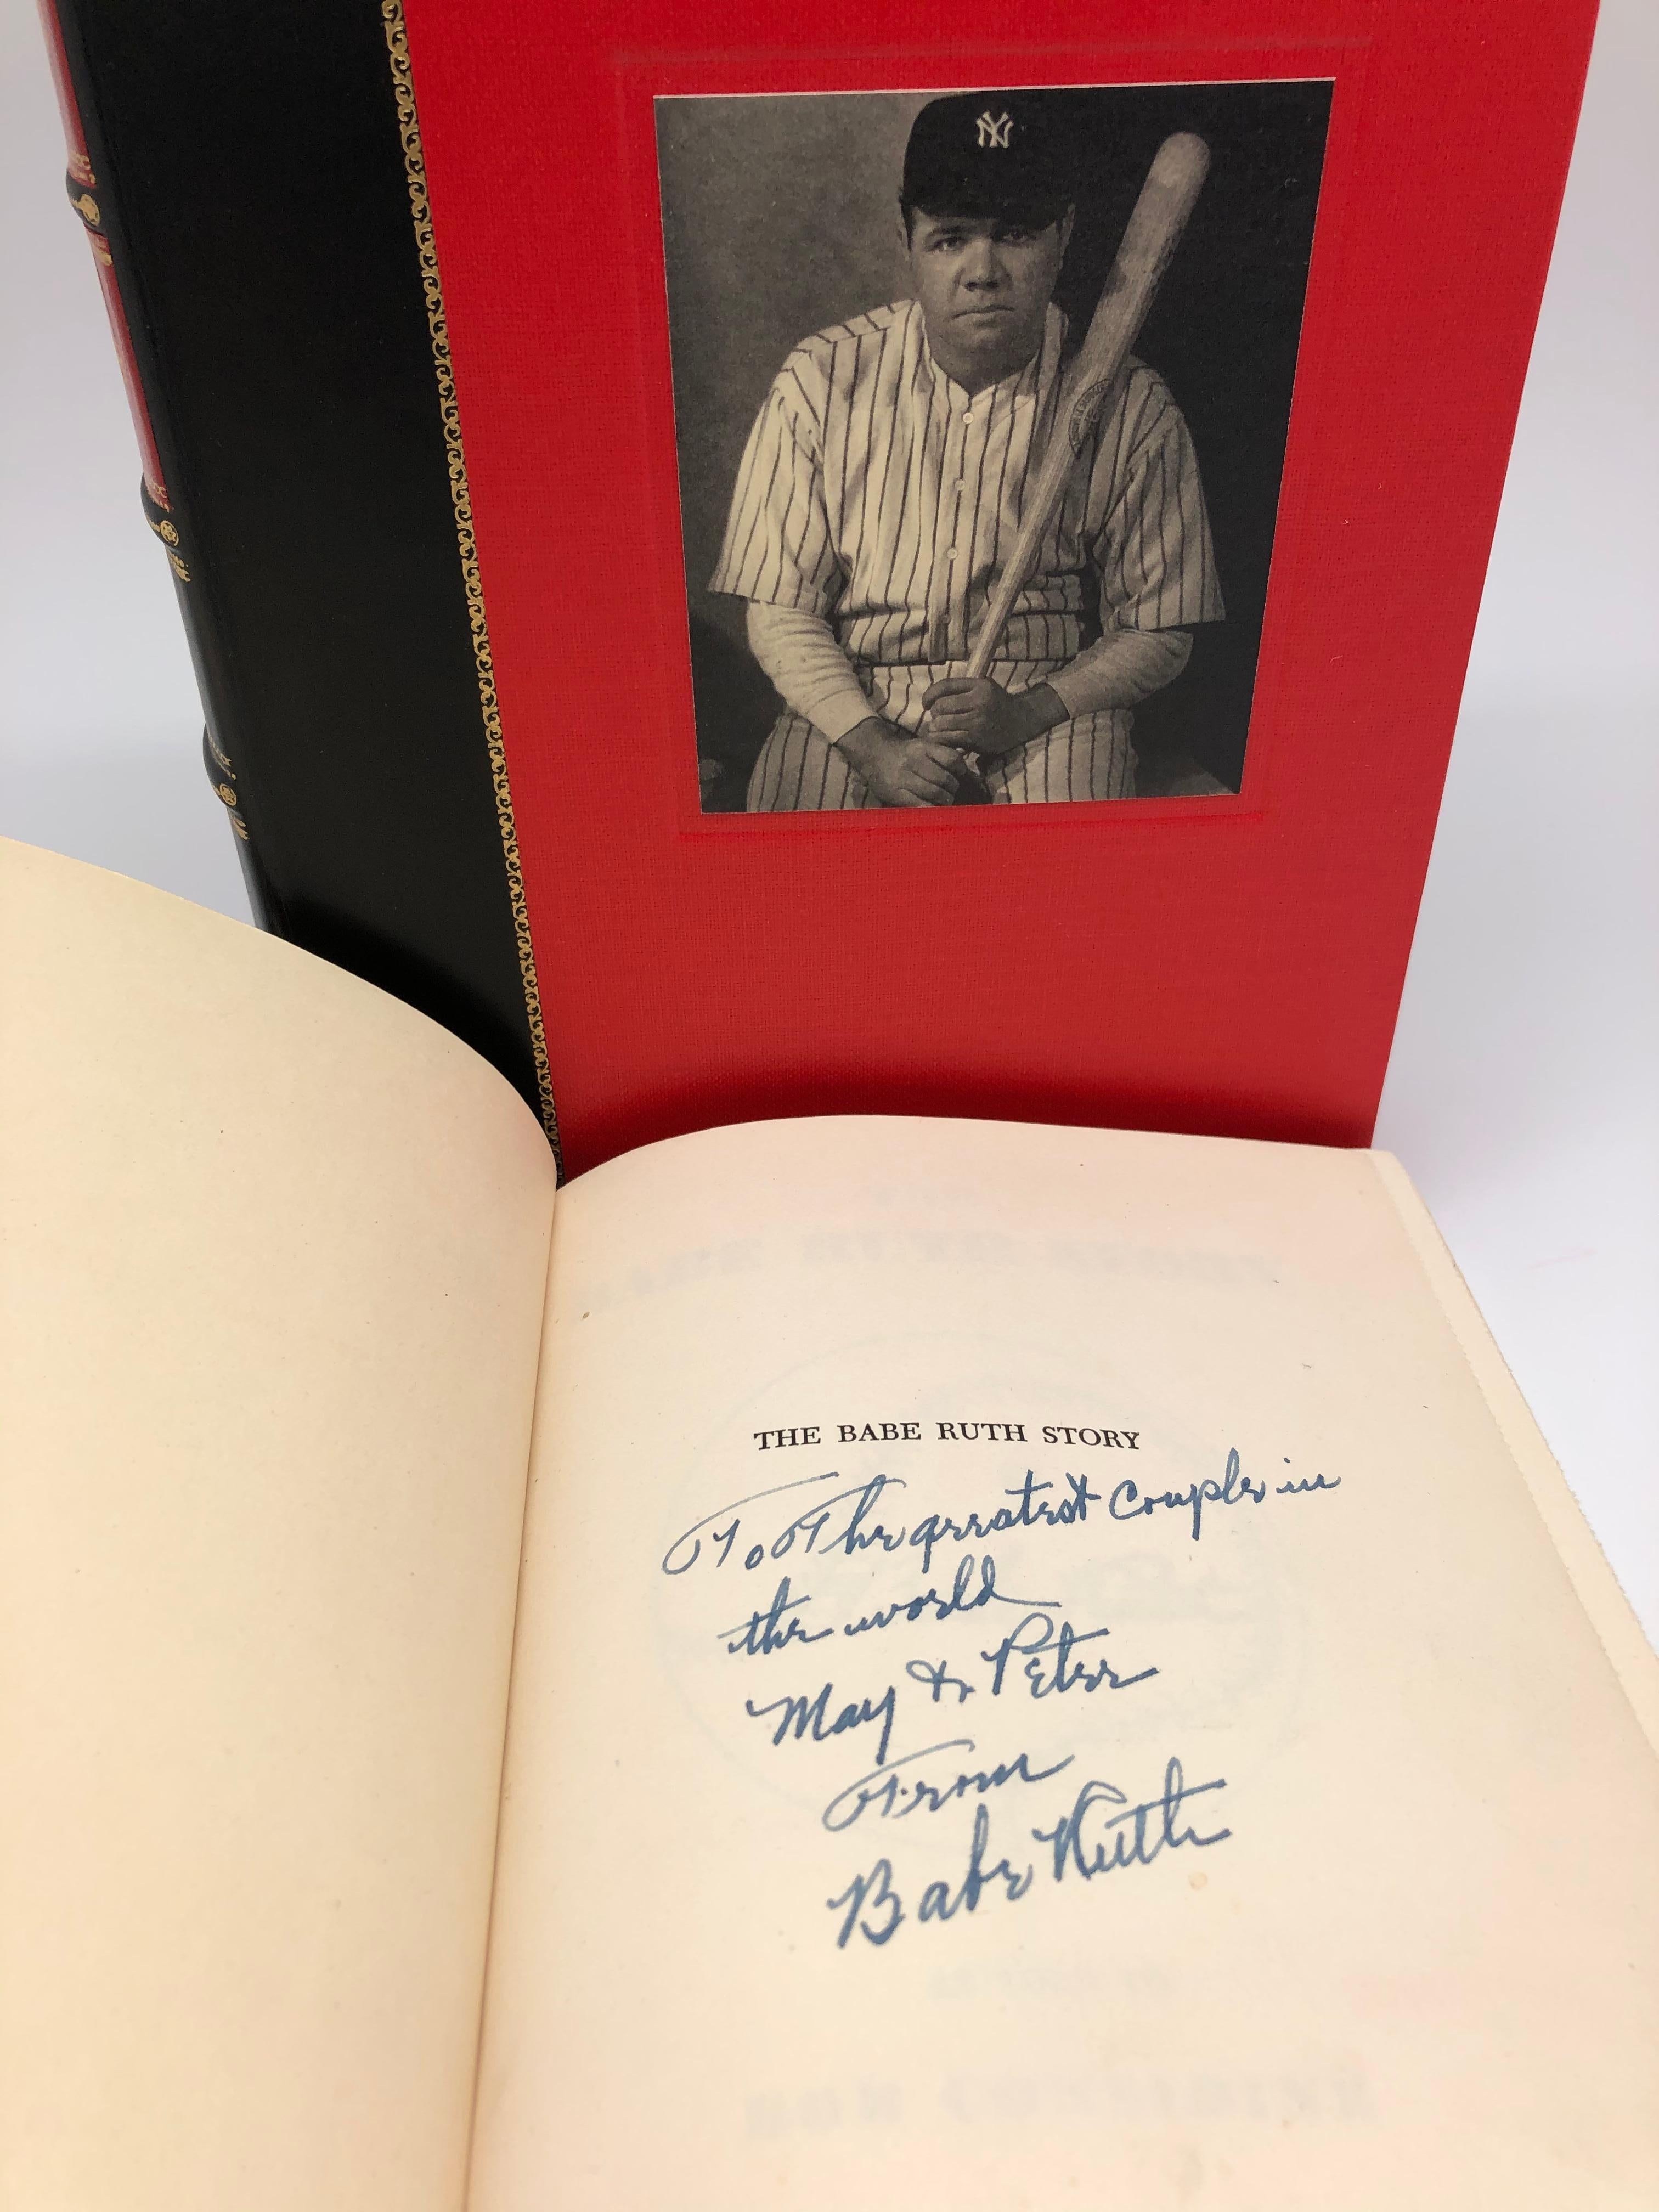 Ruth, Babe and Bob Considine. The Babe Ruth Story. New York: E. P. Dutton & Co., 1948. Signed and inscribed first edition. Later edition dust jacket and housed in custom archival clamshell.

Presented is a first edition of The Babe Ruth Story